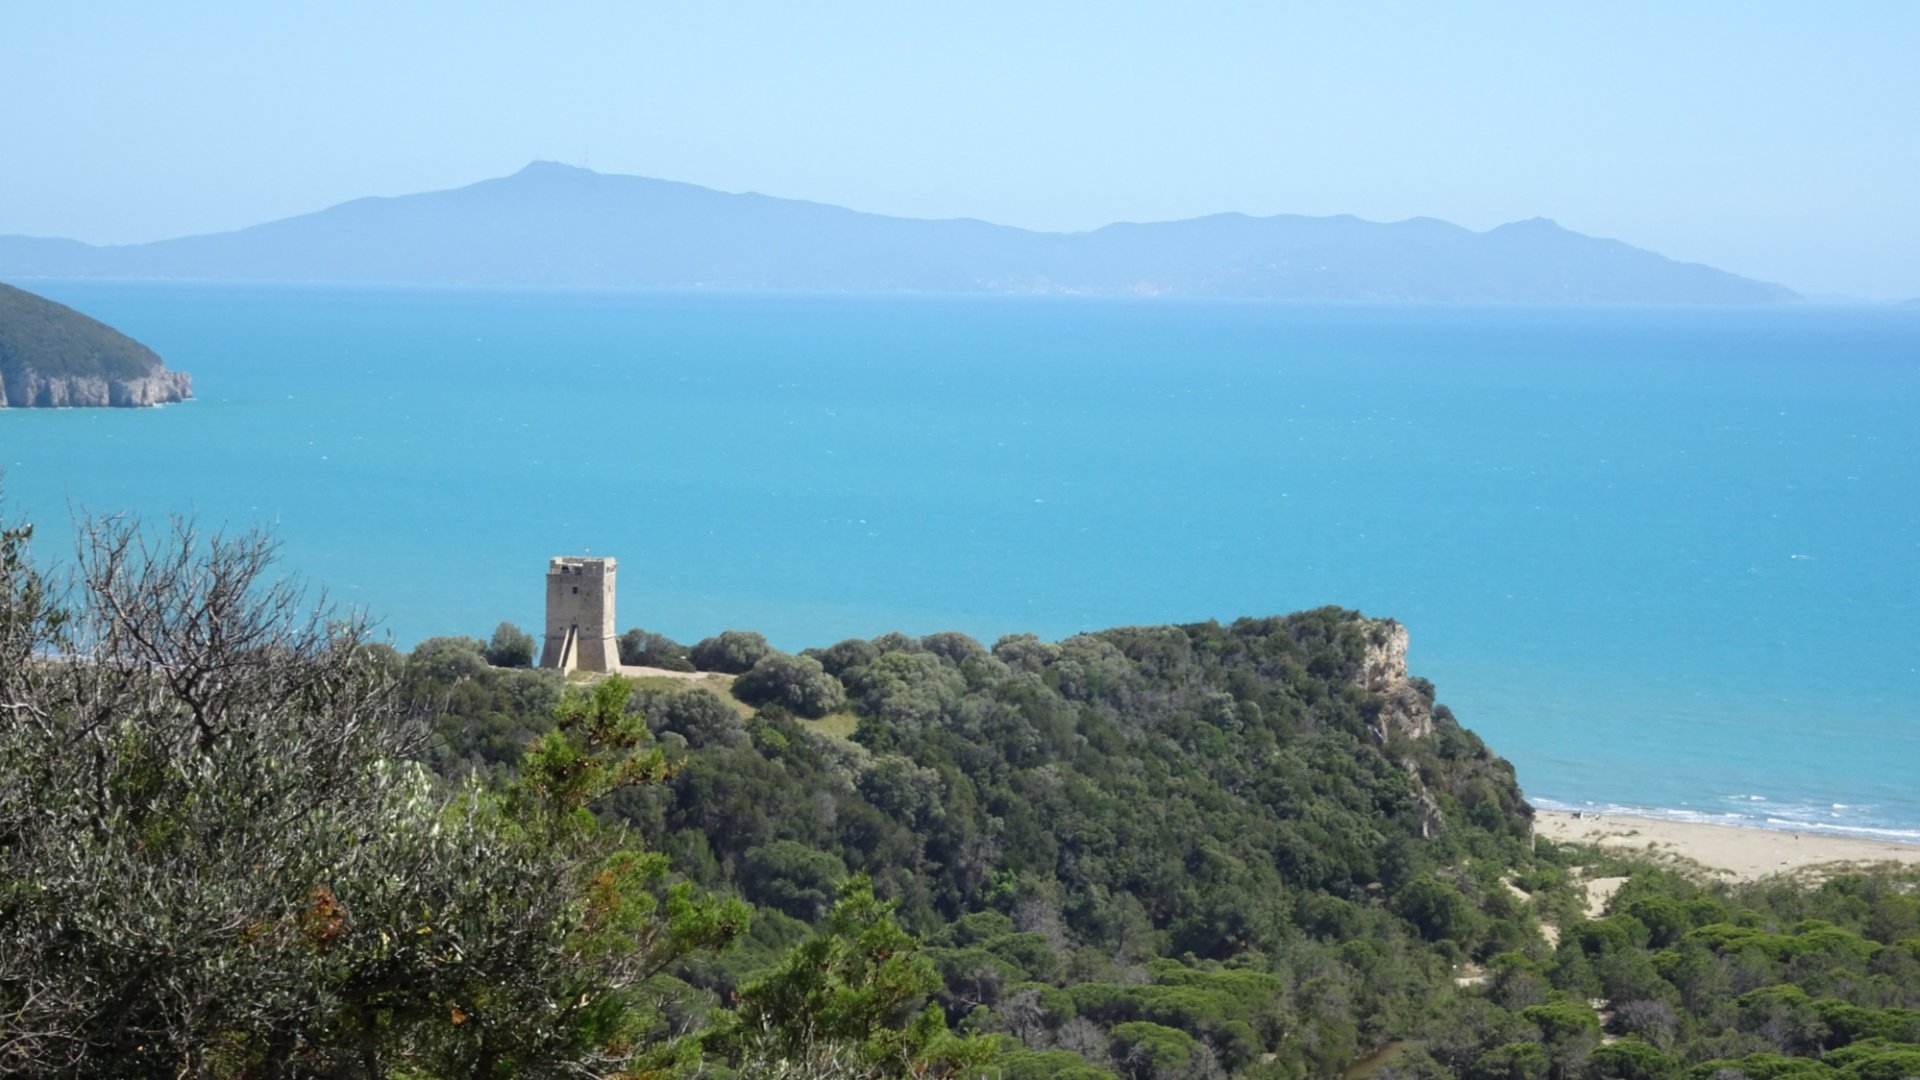 The trekking will allow you to discover the nature of the park among Mediterranean scrub and beautiful views of the Tuscan Maremma